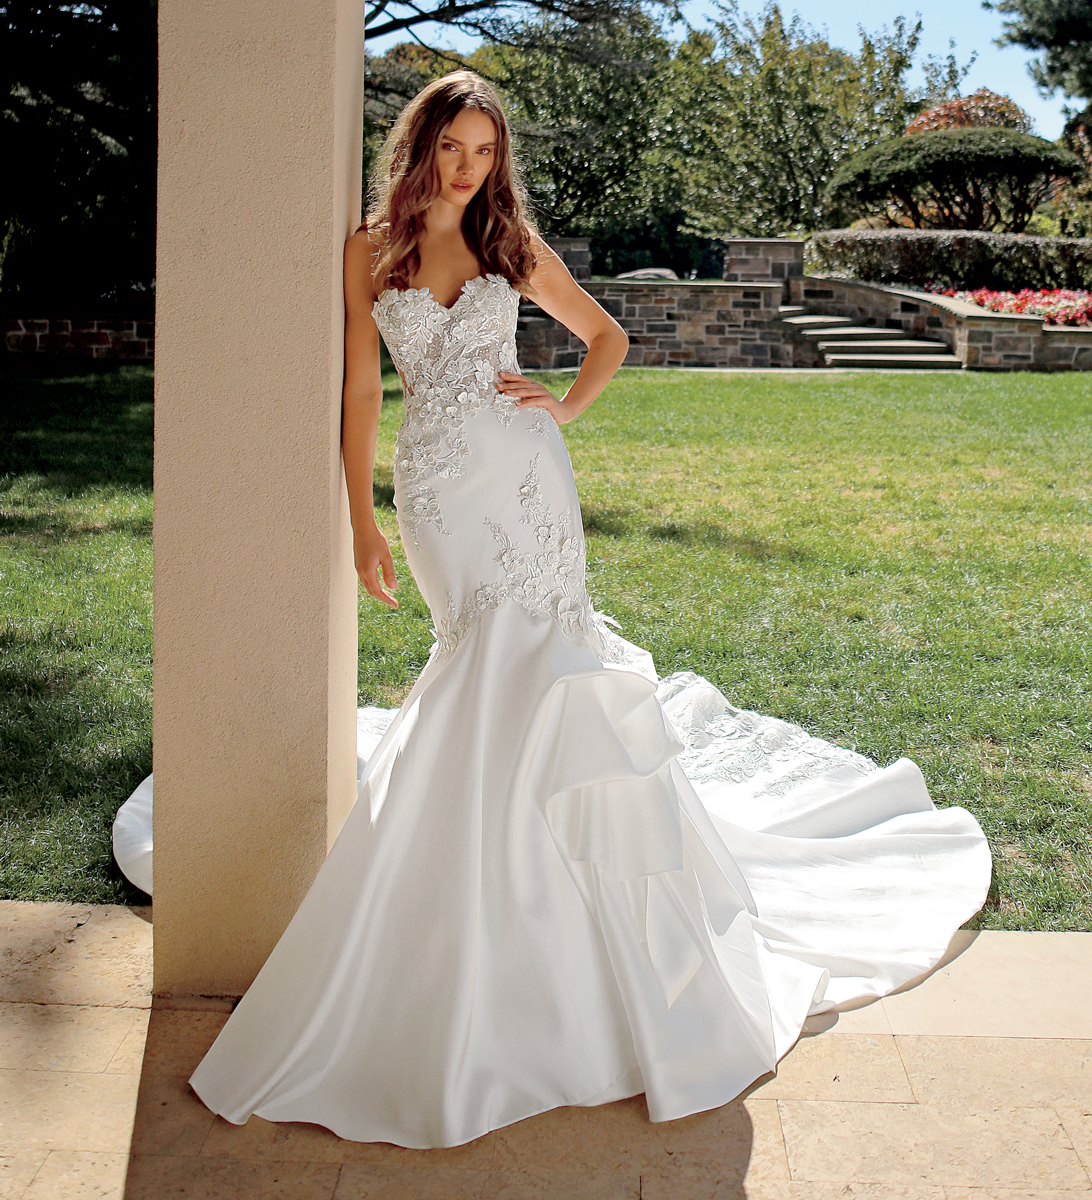 Strapless Fit And Flare Wedding Dress With Lace Bodice And Back